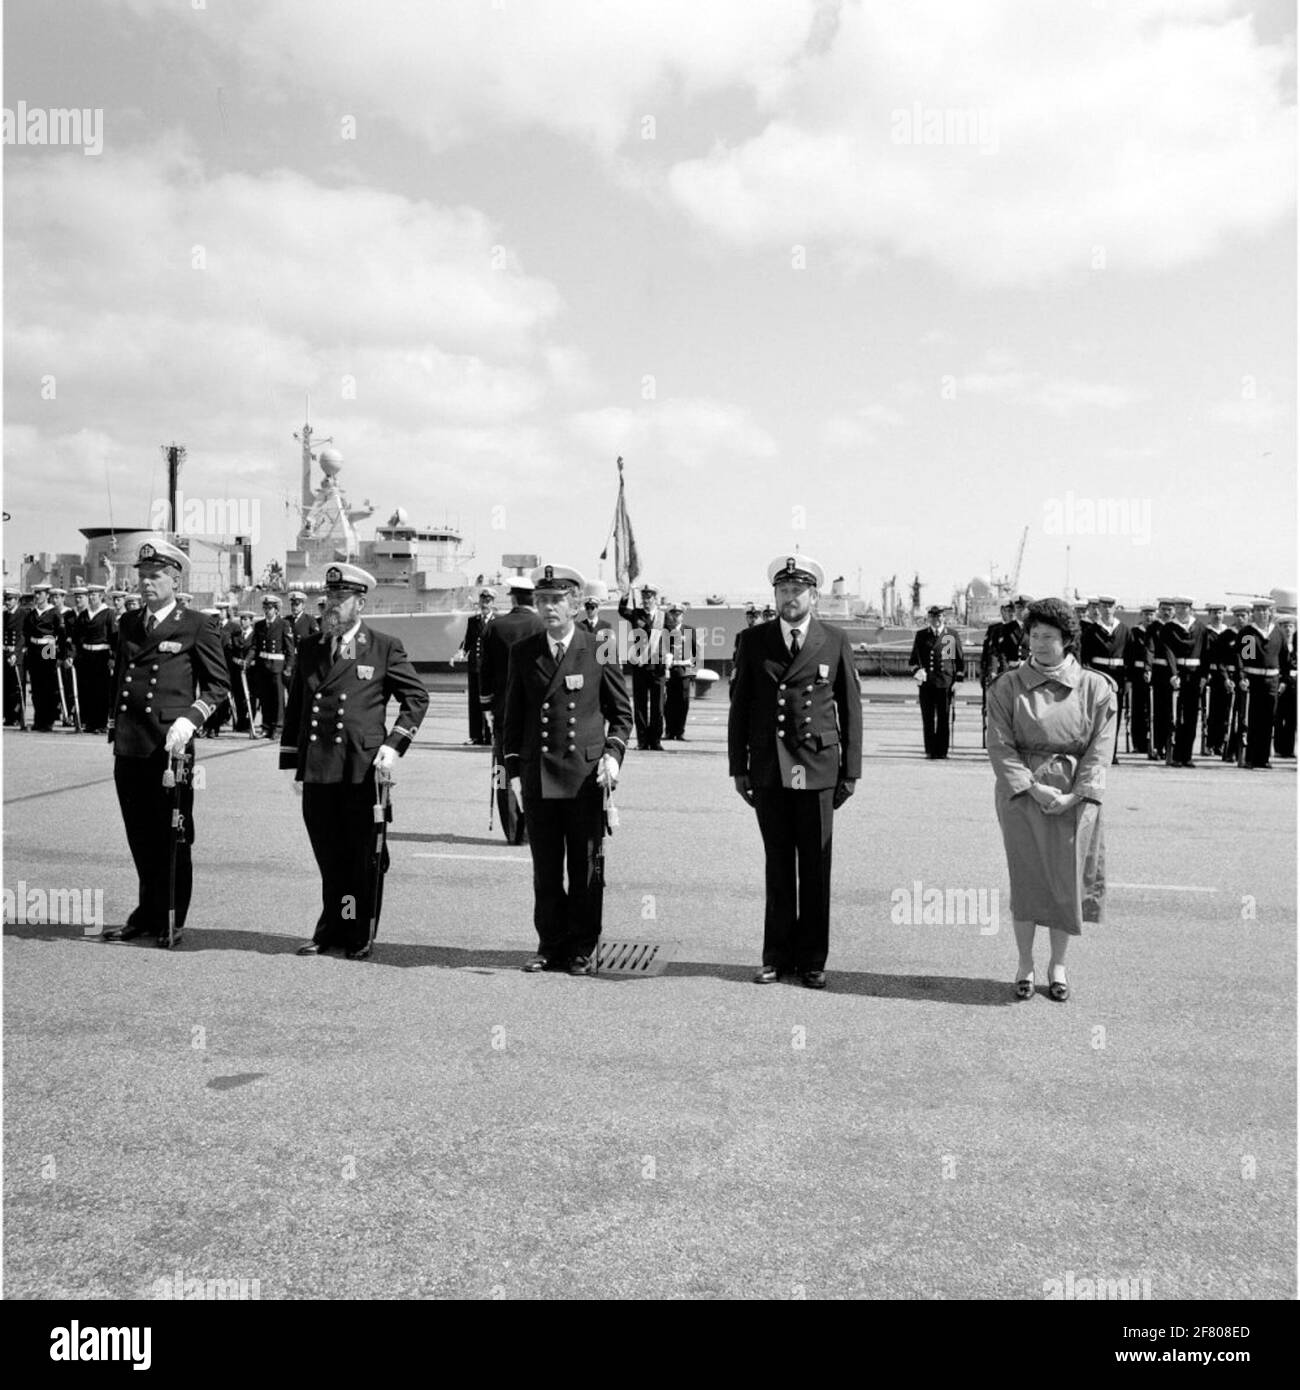 Ceremonial around the presentation of a royal award during Queen's Day on April 28, 1989 by the commander of the Underzeezienst Captain-Ter-Zee B.G.A. Fanoy (1936). The S-frigate hr.ms is in the background. Pieter Florisz (F 826, 1983-2001). Stock Photo